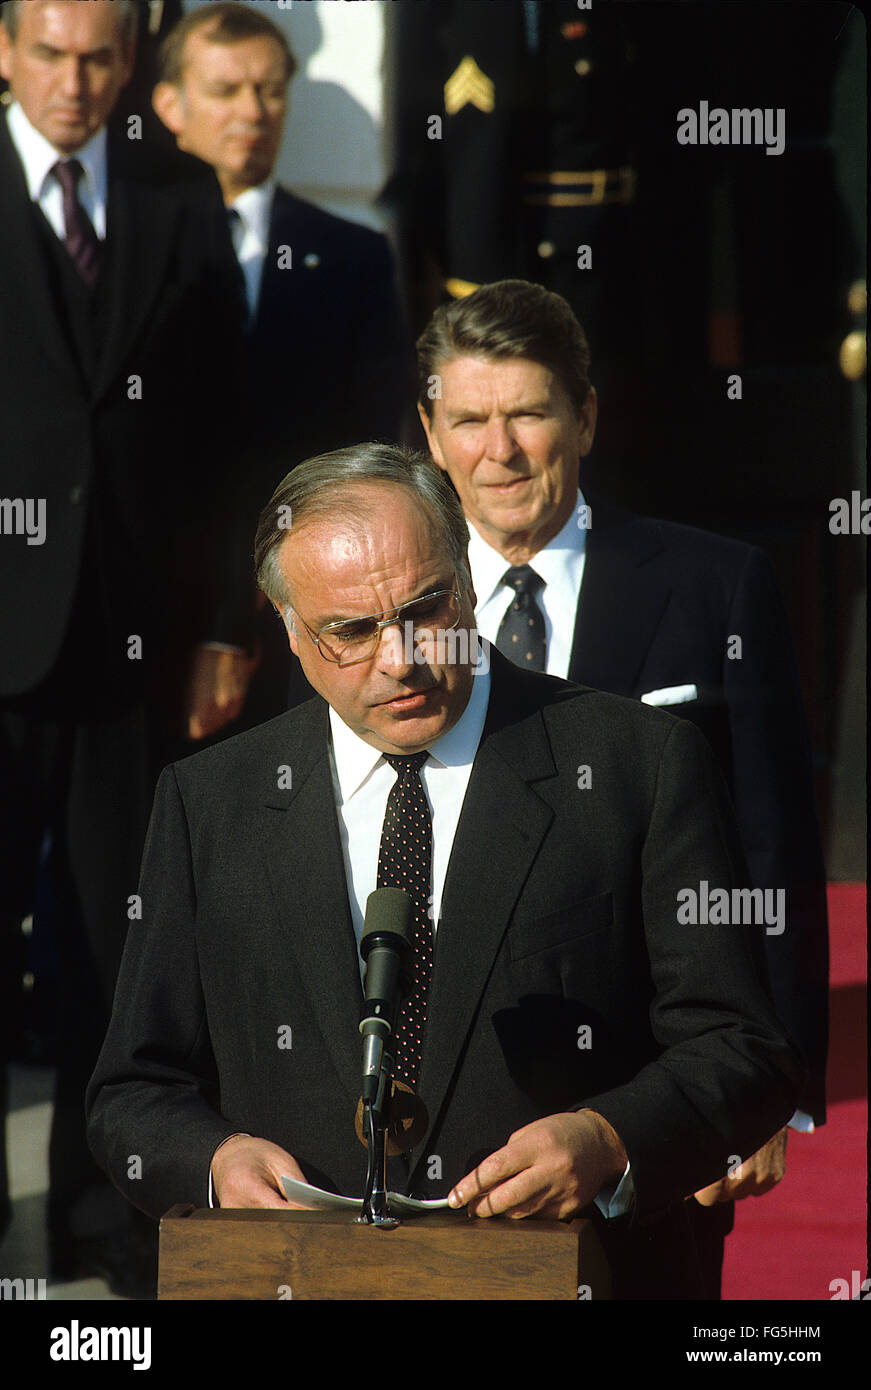 Washington, DC., USA, 15th November, 1988 Helmut Kolh  Chancellor of West Germany delivers departing remarks at the conclusion of his Official State visit to the White House. President Ronald Reagan is standing behind him at the podium at the South Diplomatic entrance to the White House.  Helmut Josef Michael Kohl  is a German conservative politician and statesman. He served as Chancellor of Germany from 1982 to 1998 (of West Germany 1982–90 and of the reunited Germany 1990–98) and as the chairman of the Christian Democratic Union (CDU) from 1973 to 1998. Credit: Mark Reinstein Stock Photo